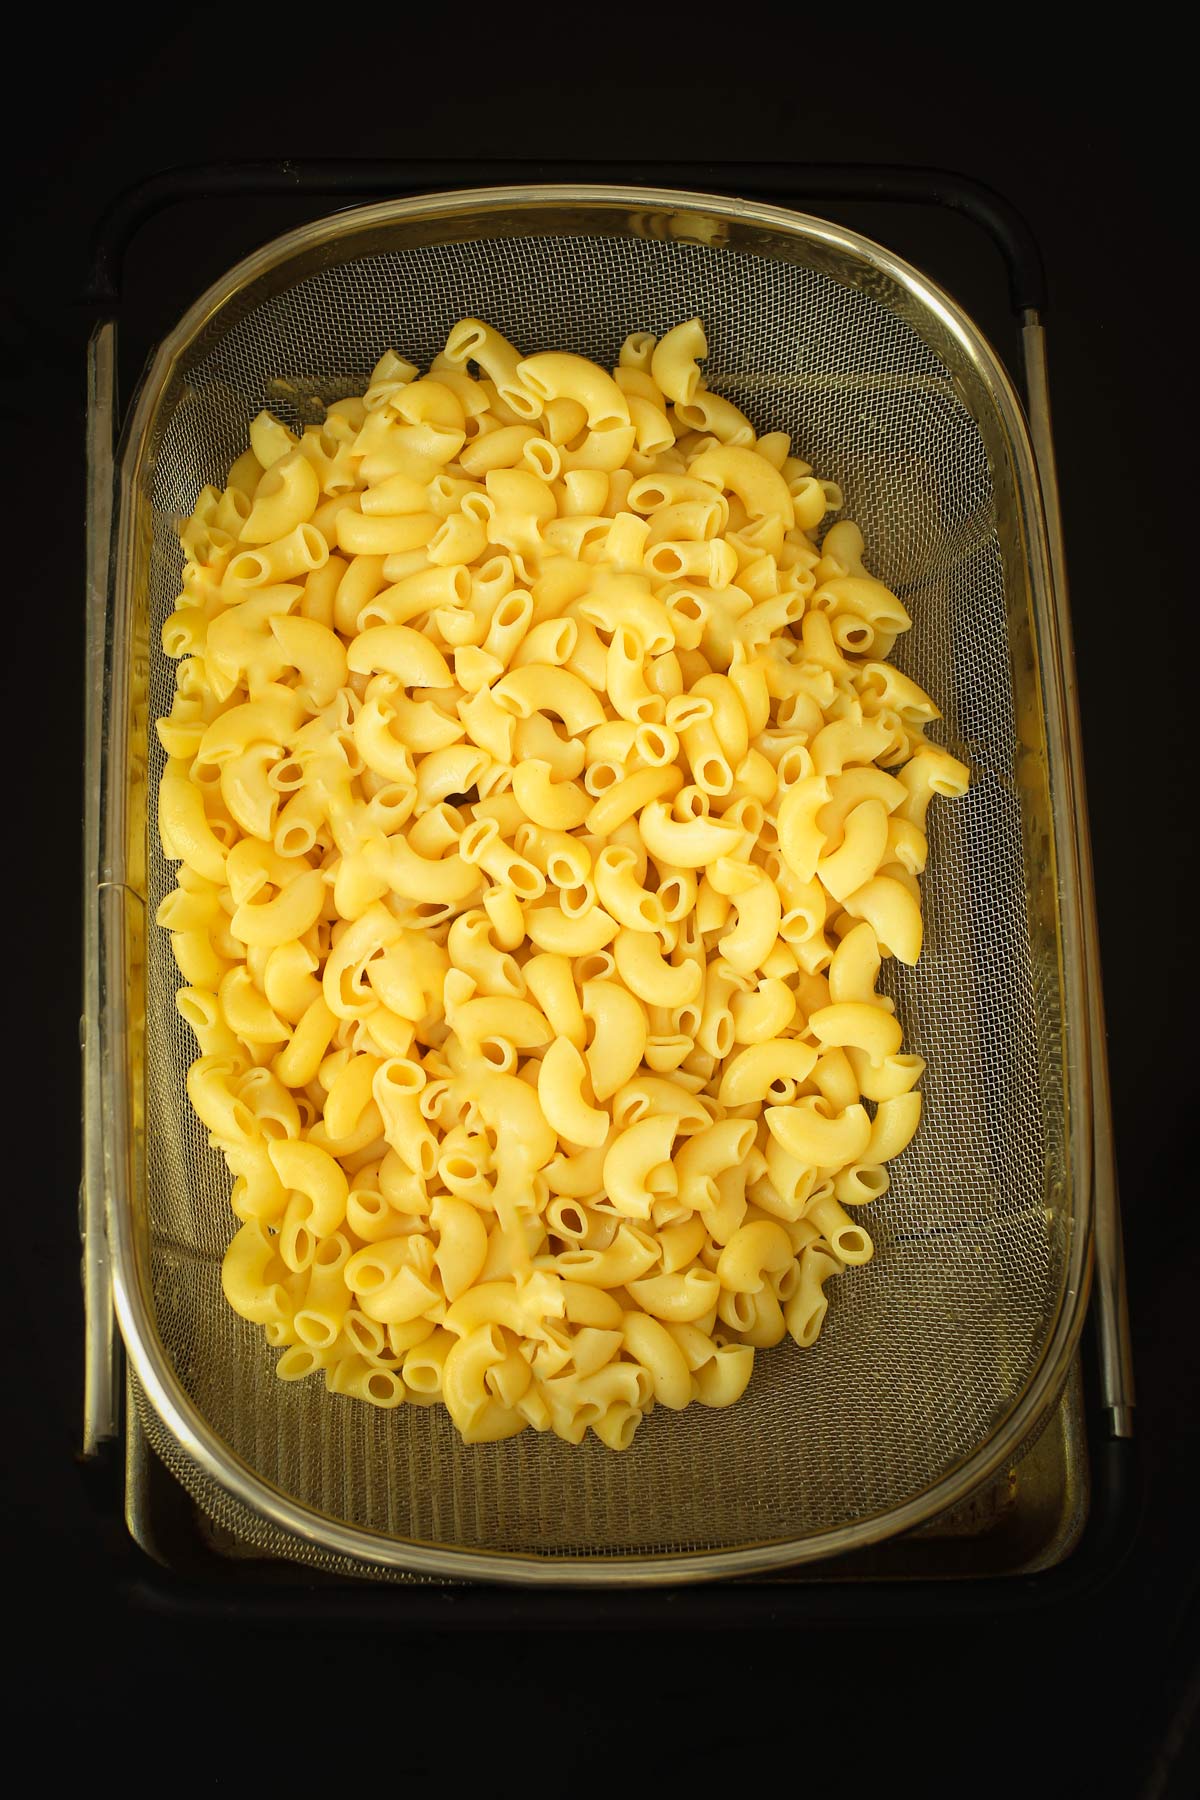 the macaroni draining and cooling in a colander.